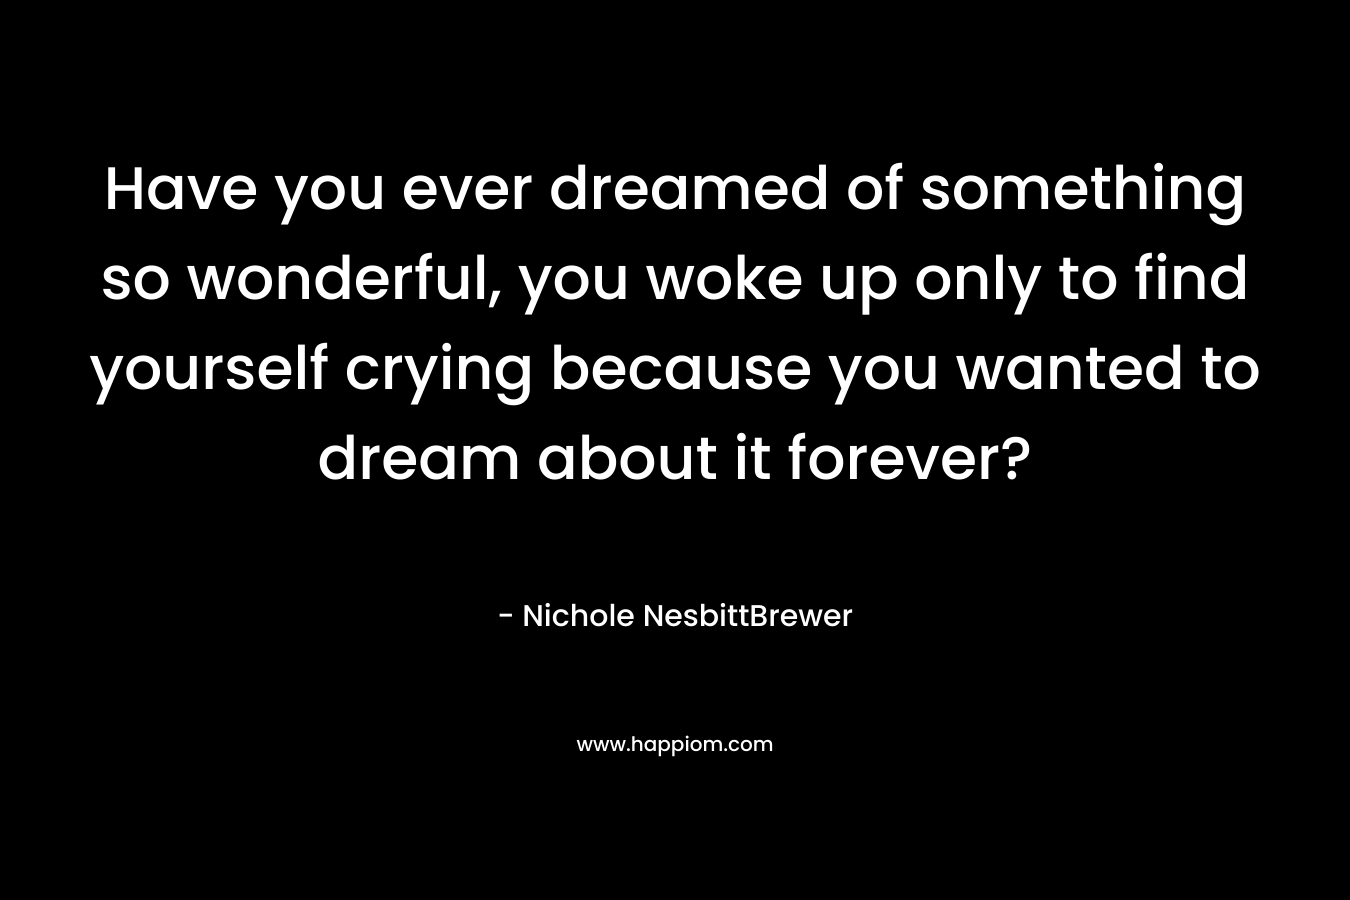 Have you ever dreamed of something so wonderful, you woke up only to find yourself crying because you wanted to dream about it forever? – Nichole NesbittBrewer